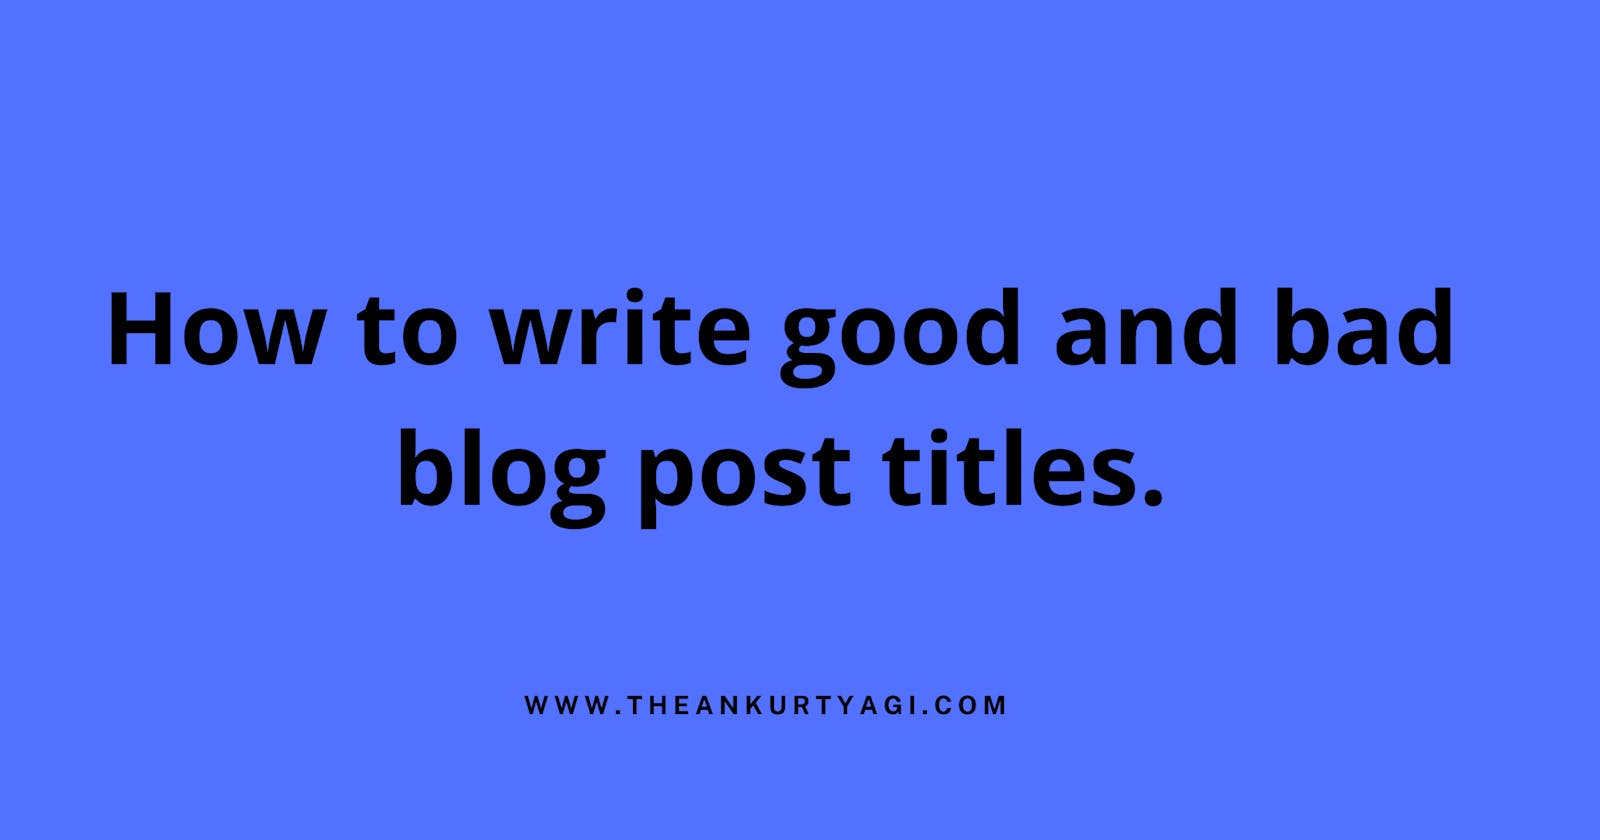 How to Write Good and Bad Blog Post Titles